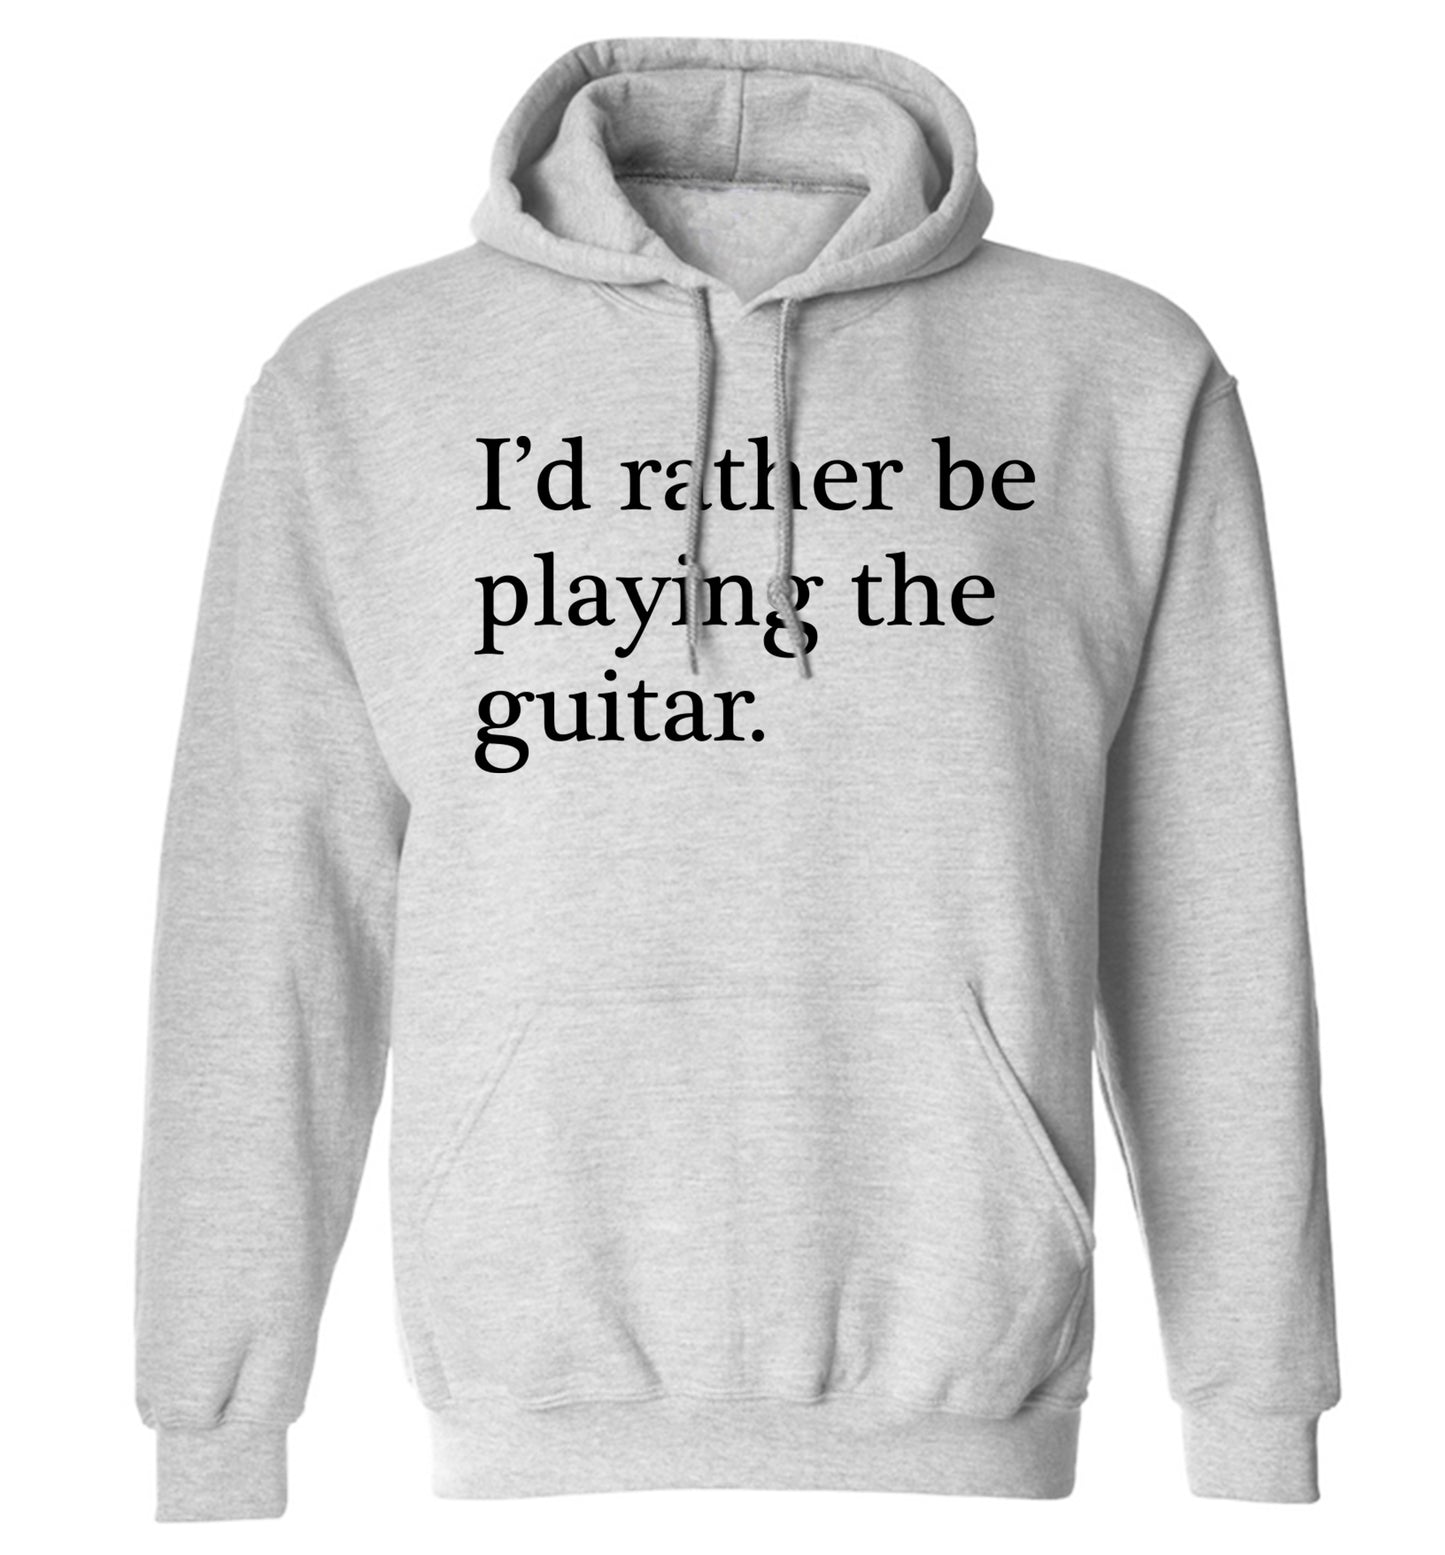 I'd rather be playing the guitar adults unisex grey hoodie 2XL